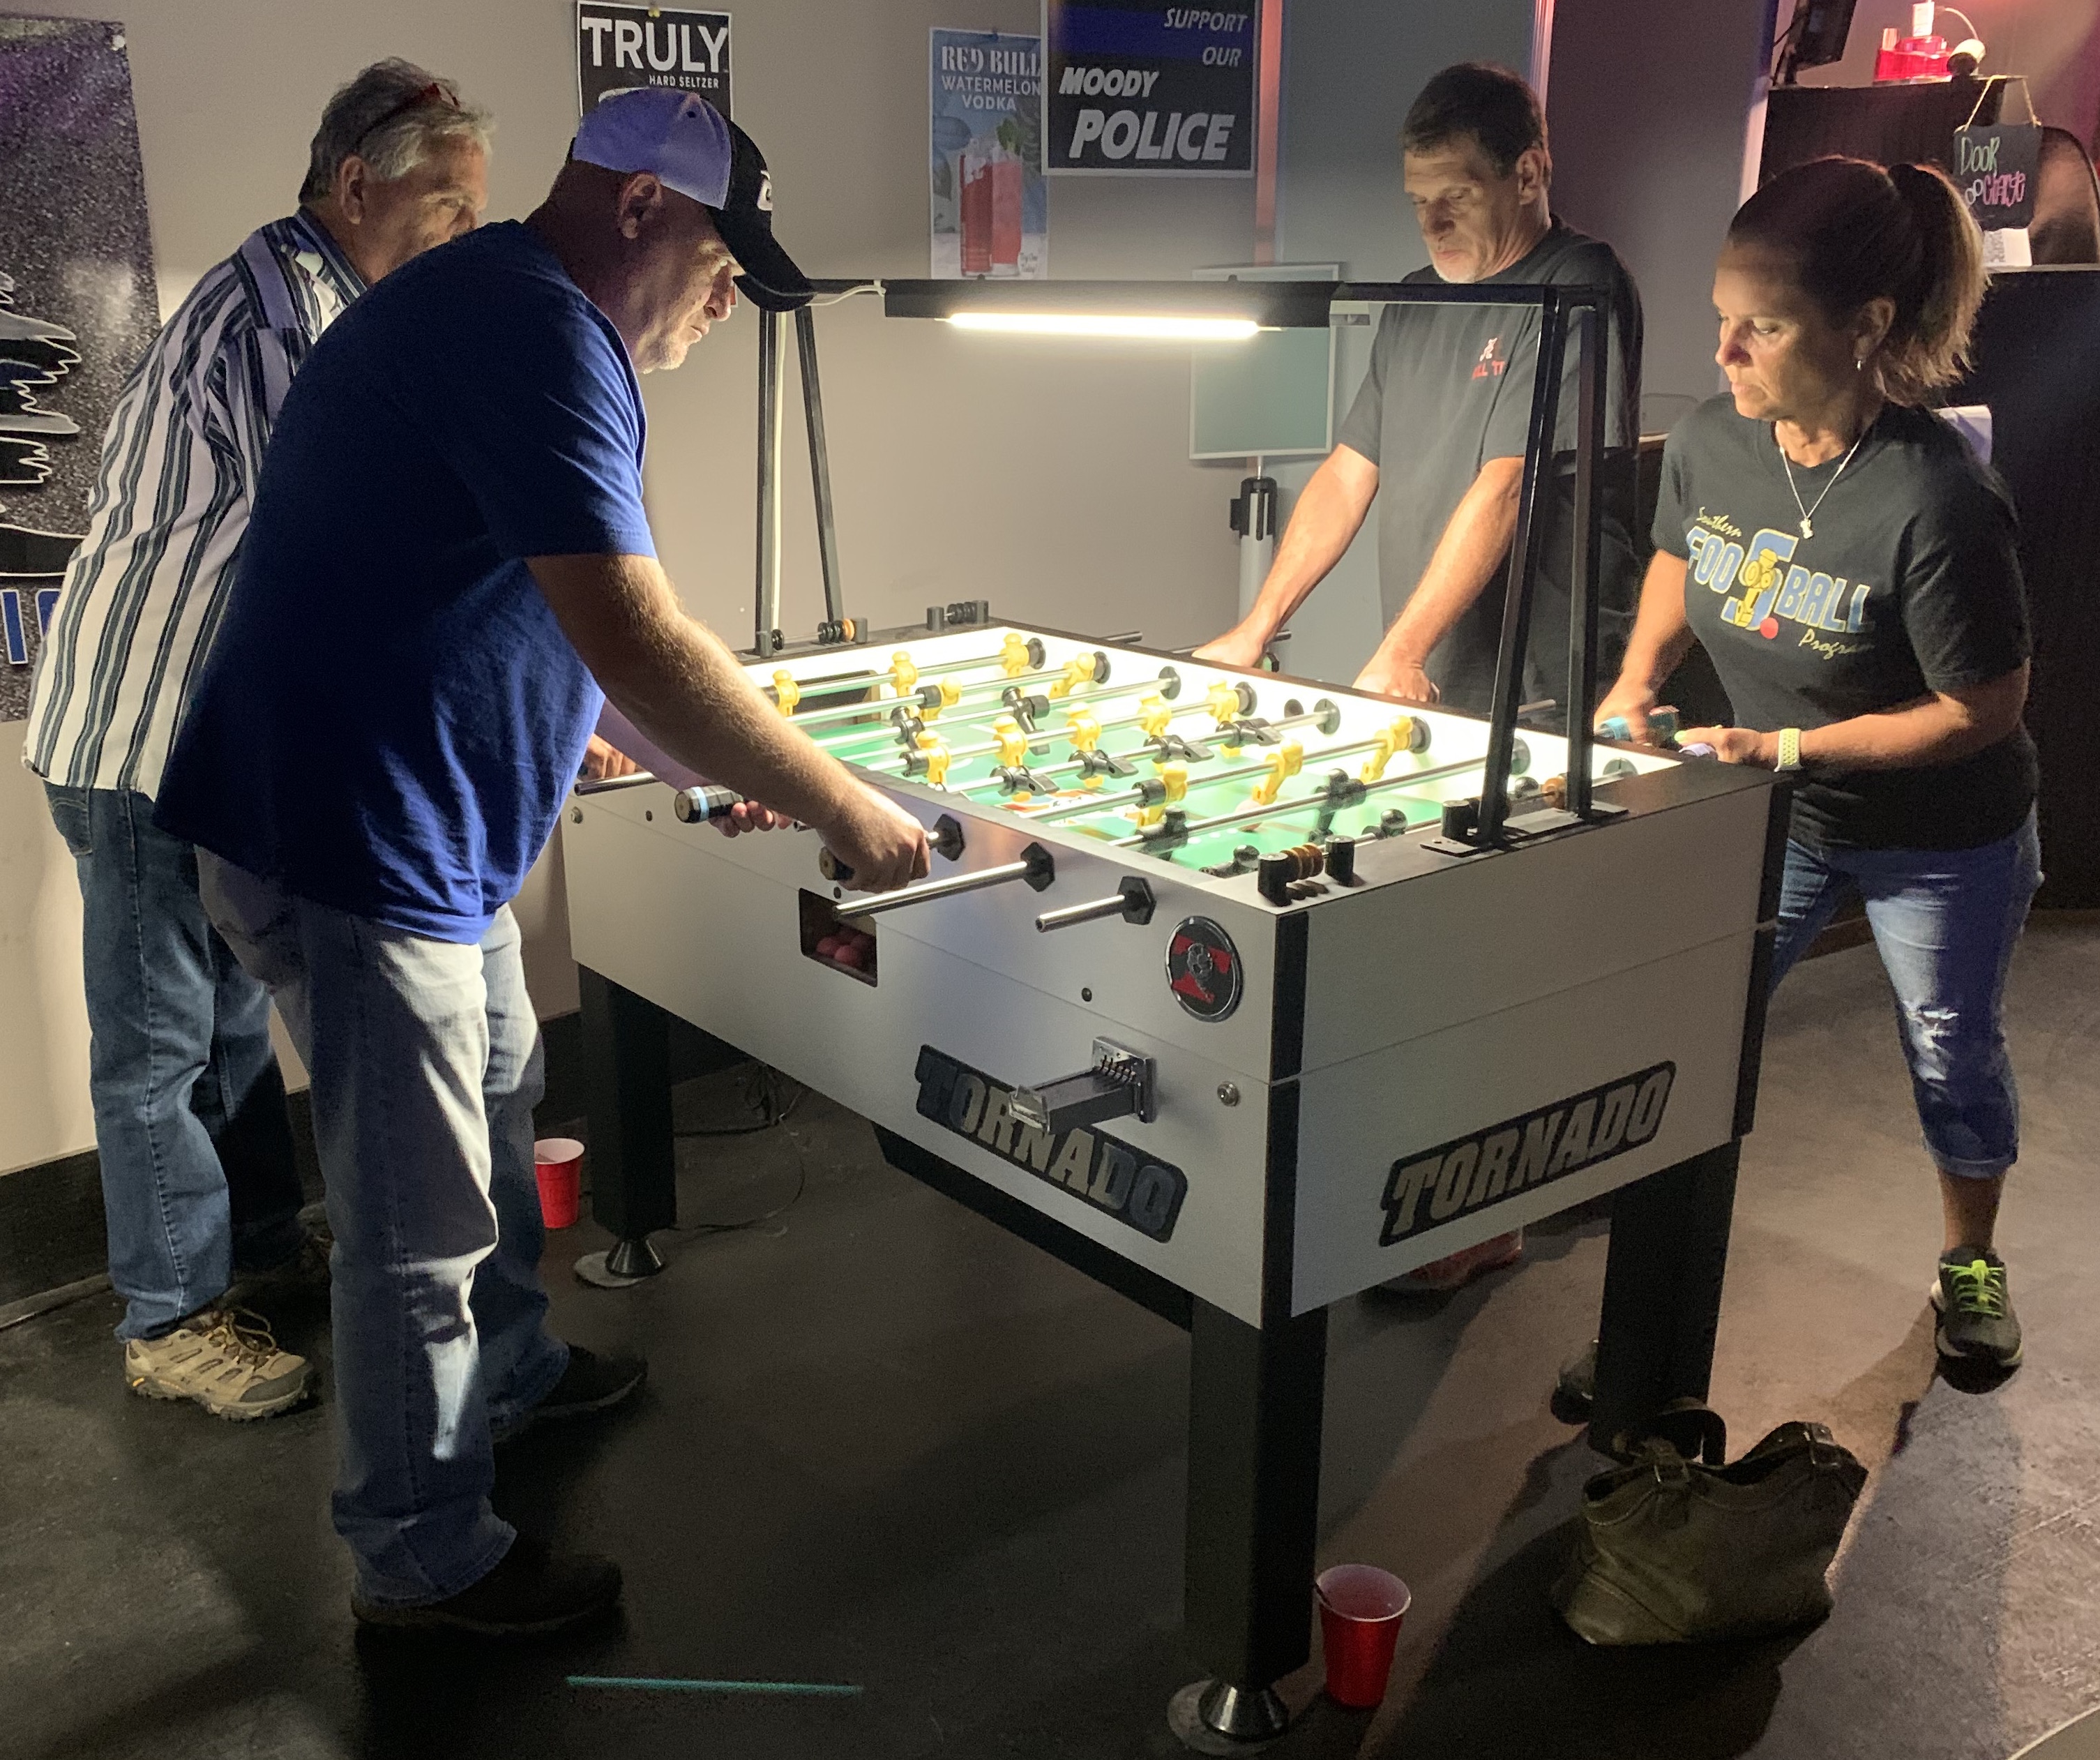 Open BYP foosball action at Van's Bar in Leeds,AL. with the event champs Steve Dodgen & Ken Williams shown on the left competing in a match vs Randy Strickland & Cheryl Lowe of which had already taken down the top seeded team of the tournament.